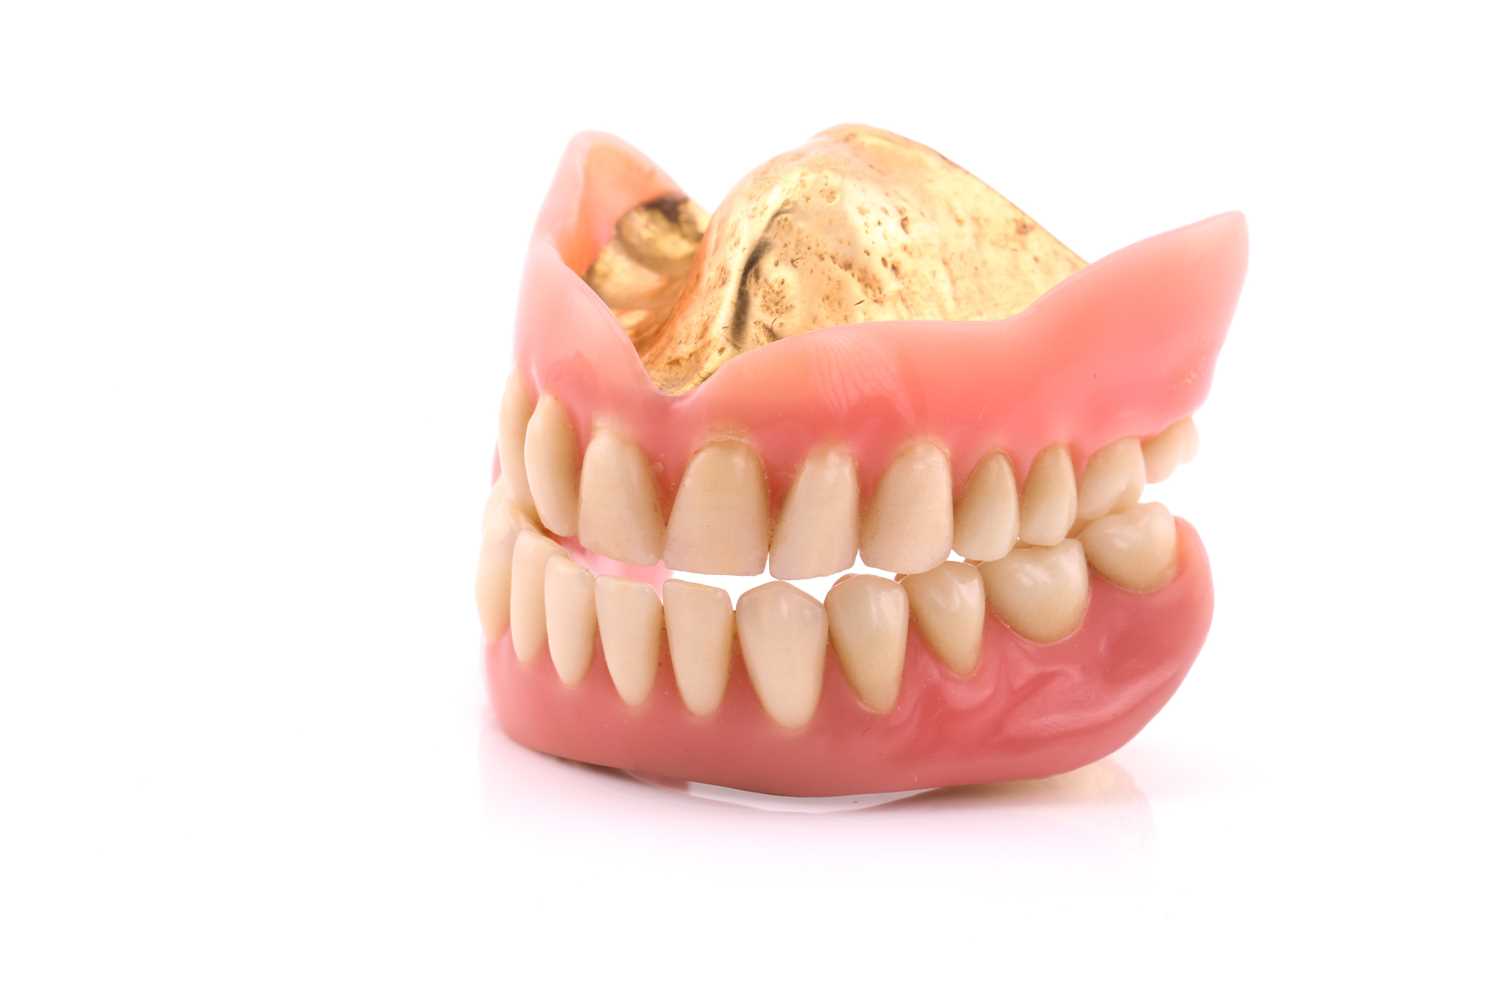 Pair of false teeth with gold content, 53.8 grams all inCondition report: Tested as 18k gold plus